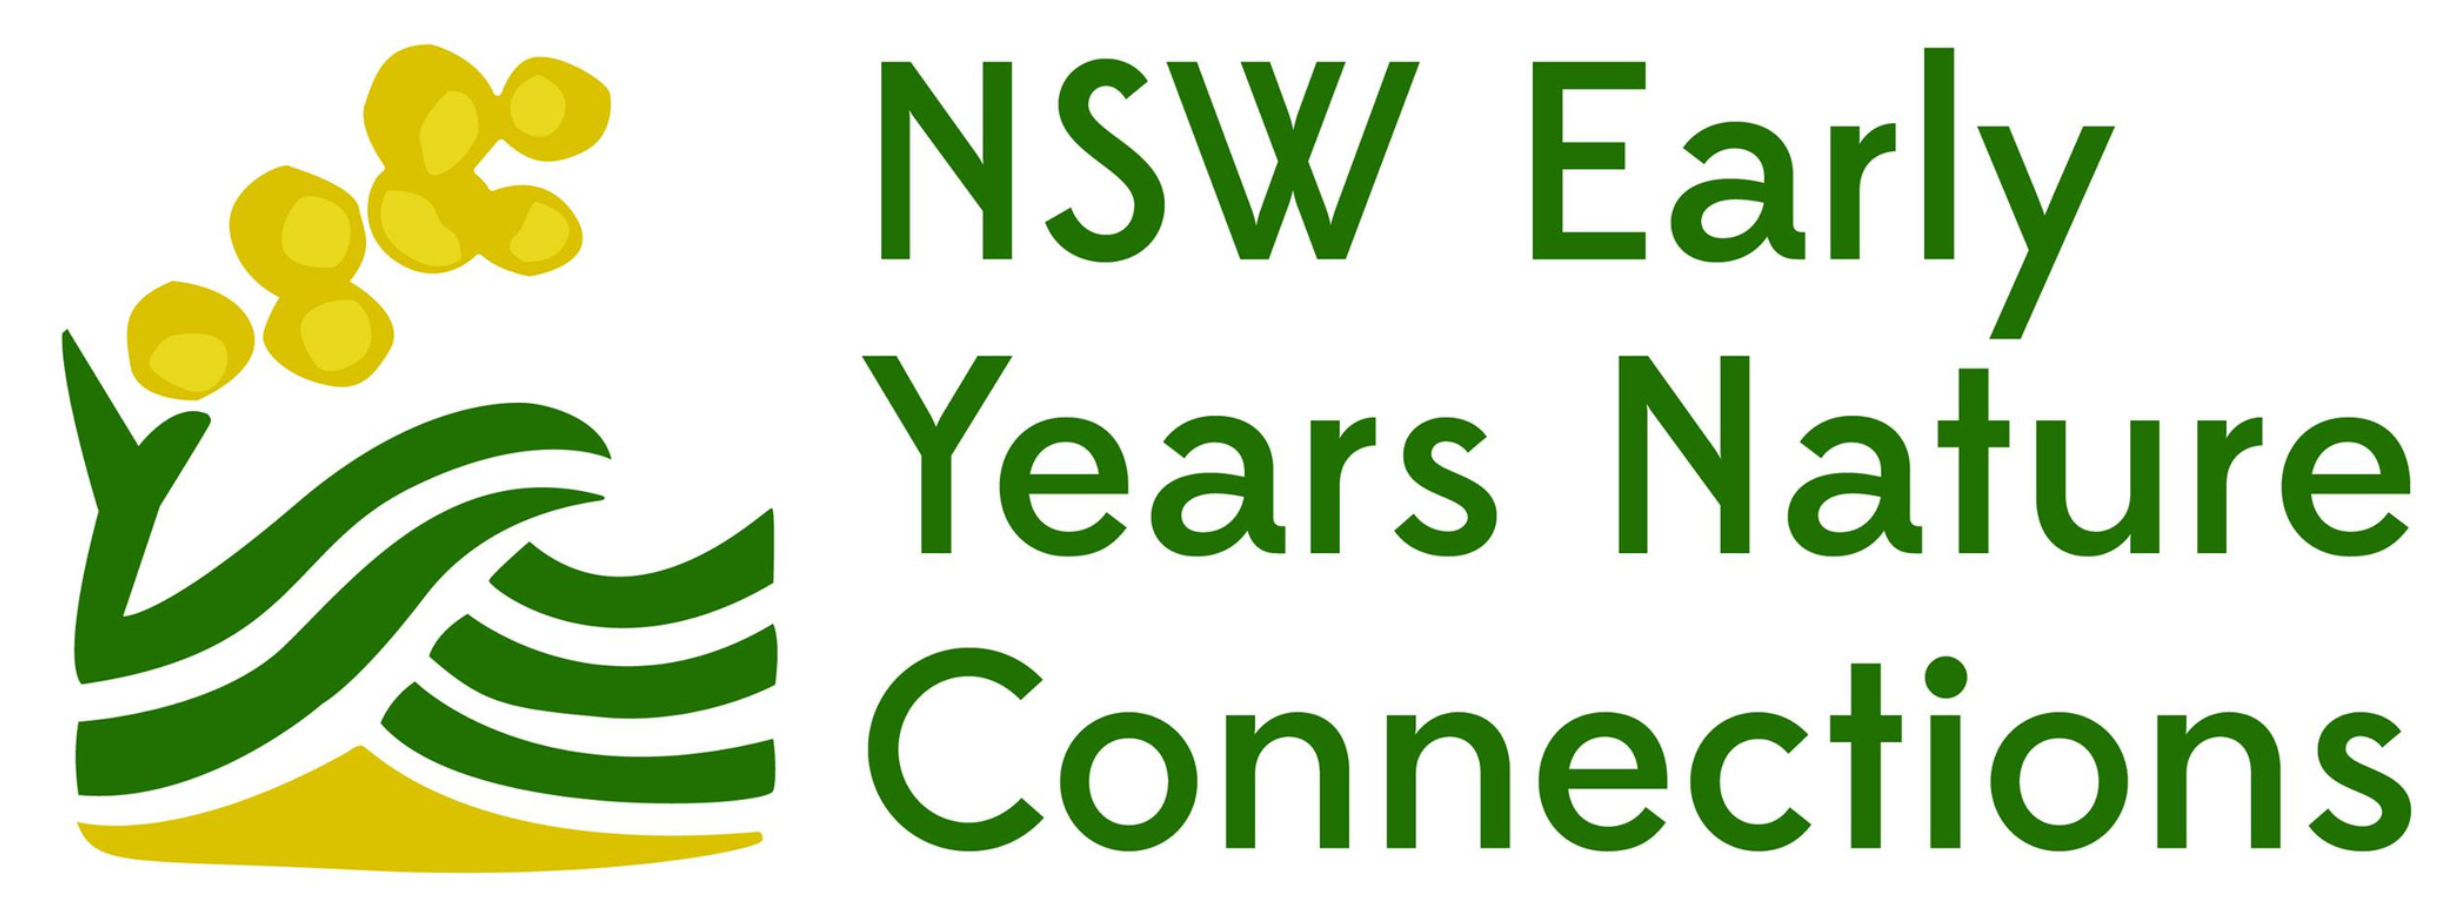 NSW EARLY YEARS NATURE CONNECTIONS